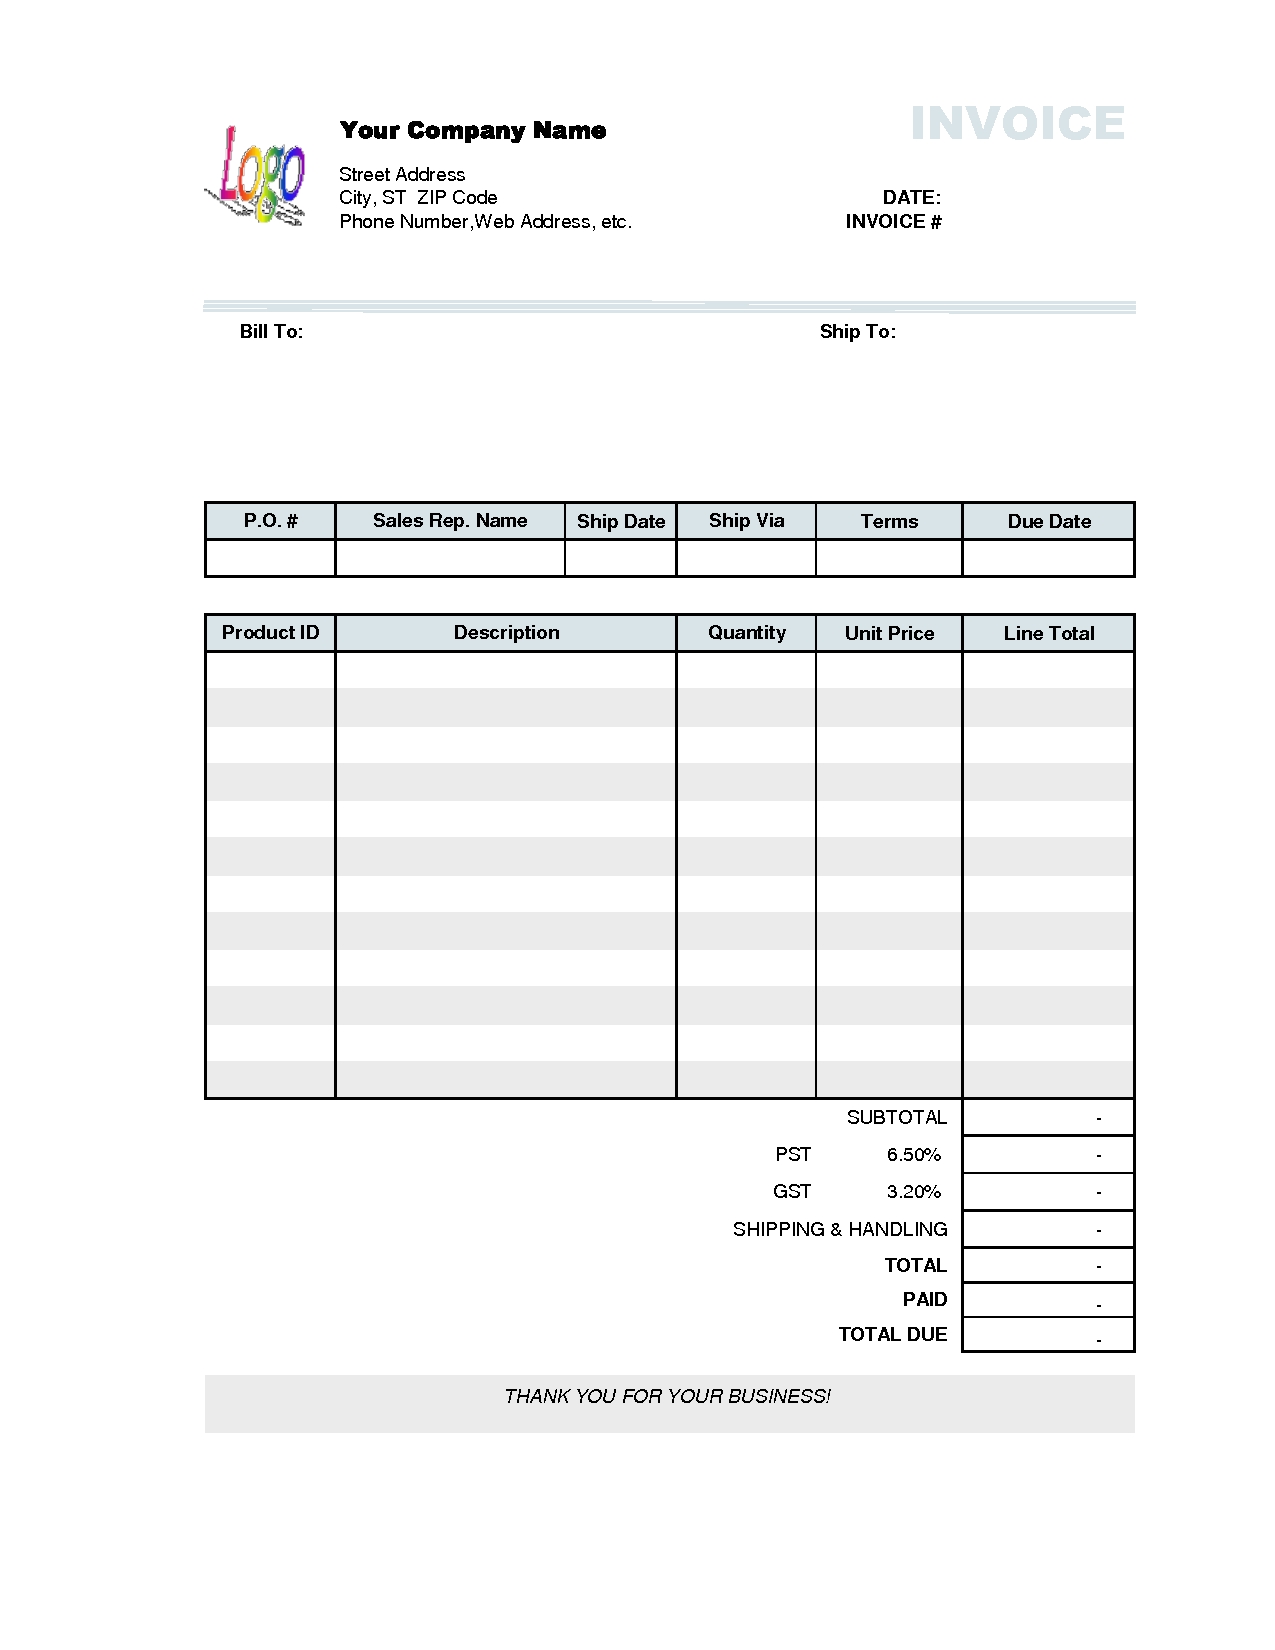 business invoice template invoice example invoice forms online